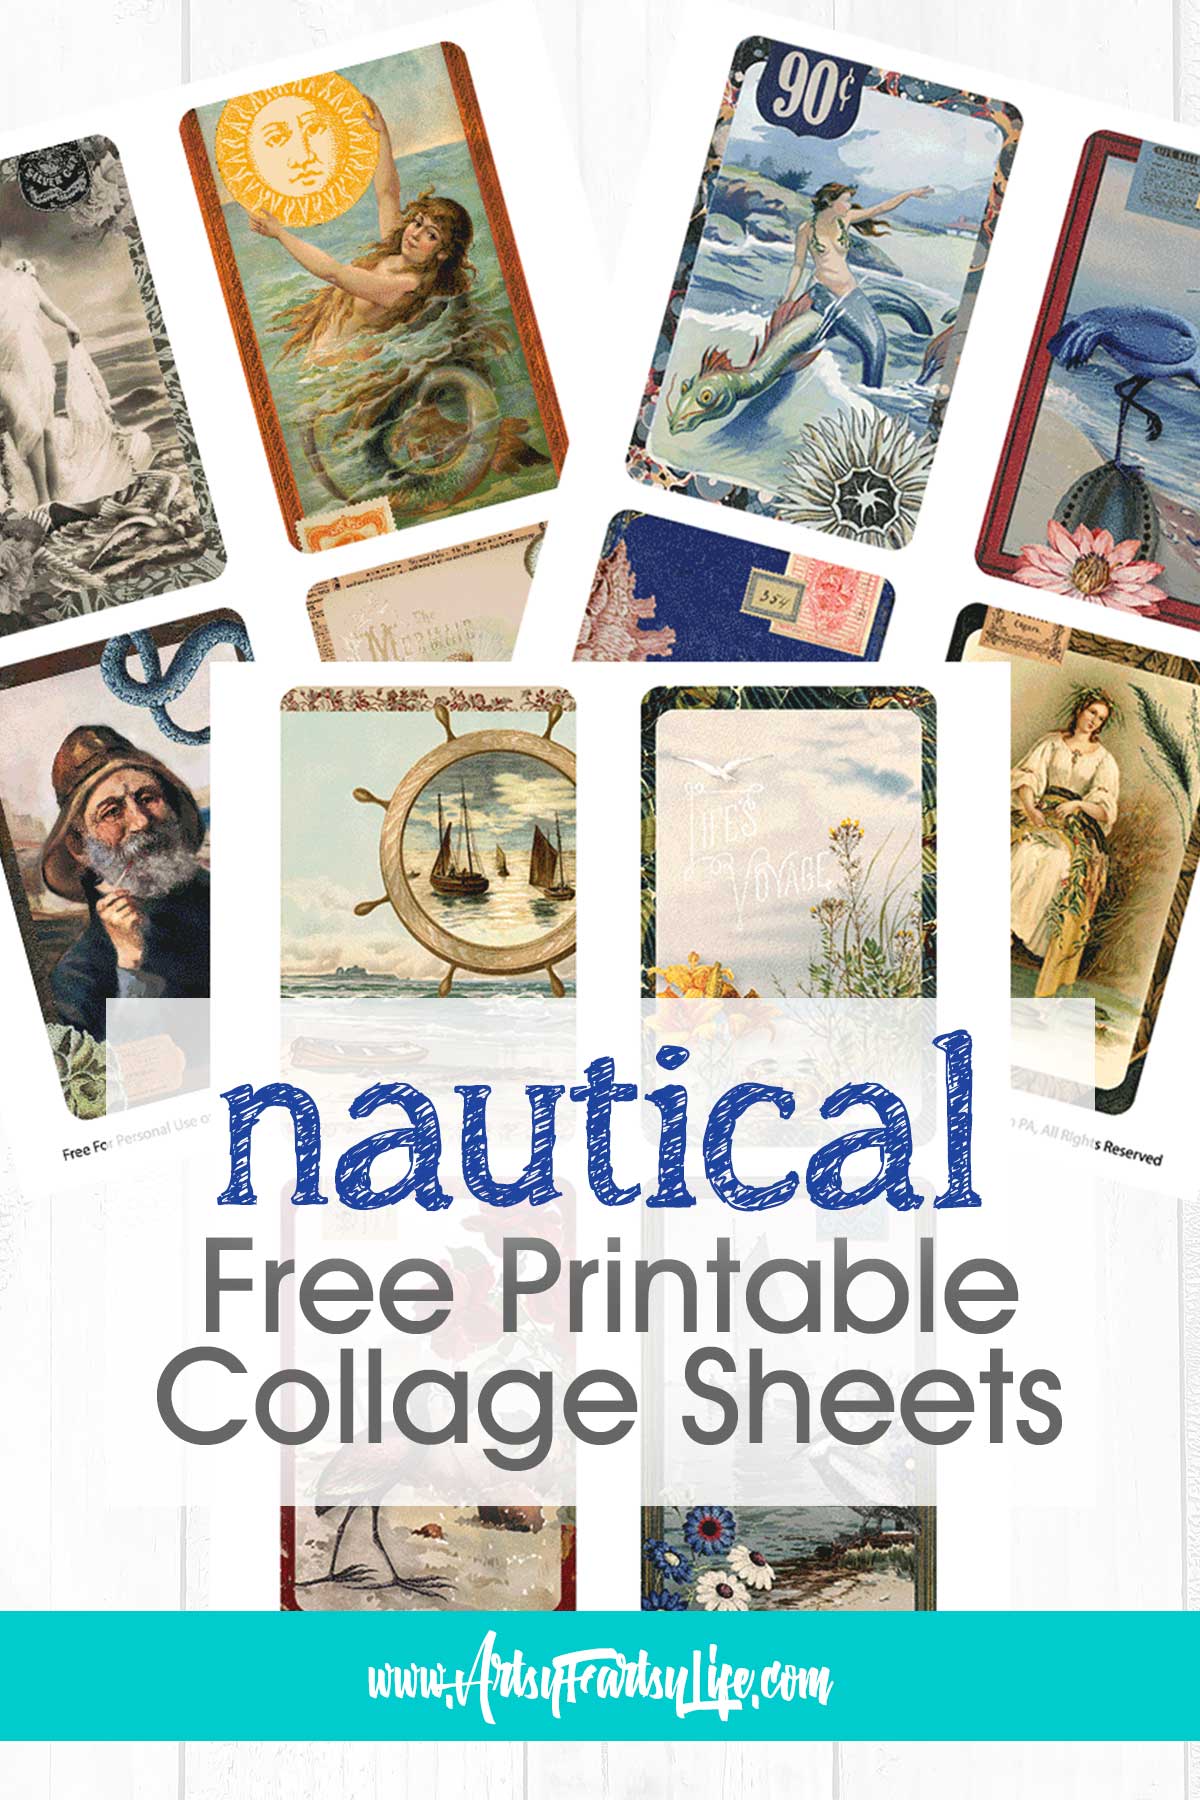 Vintage Nautical Cards for Junk Journals - Free Printable
